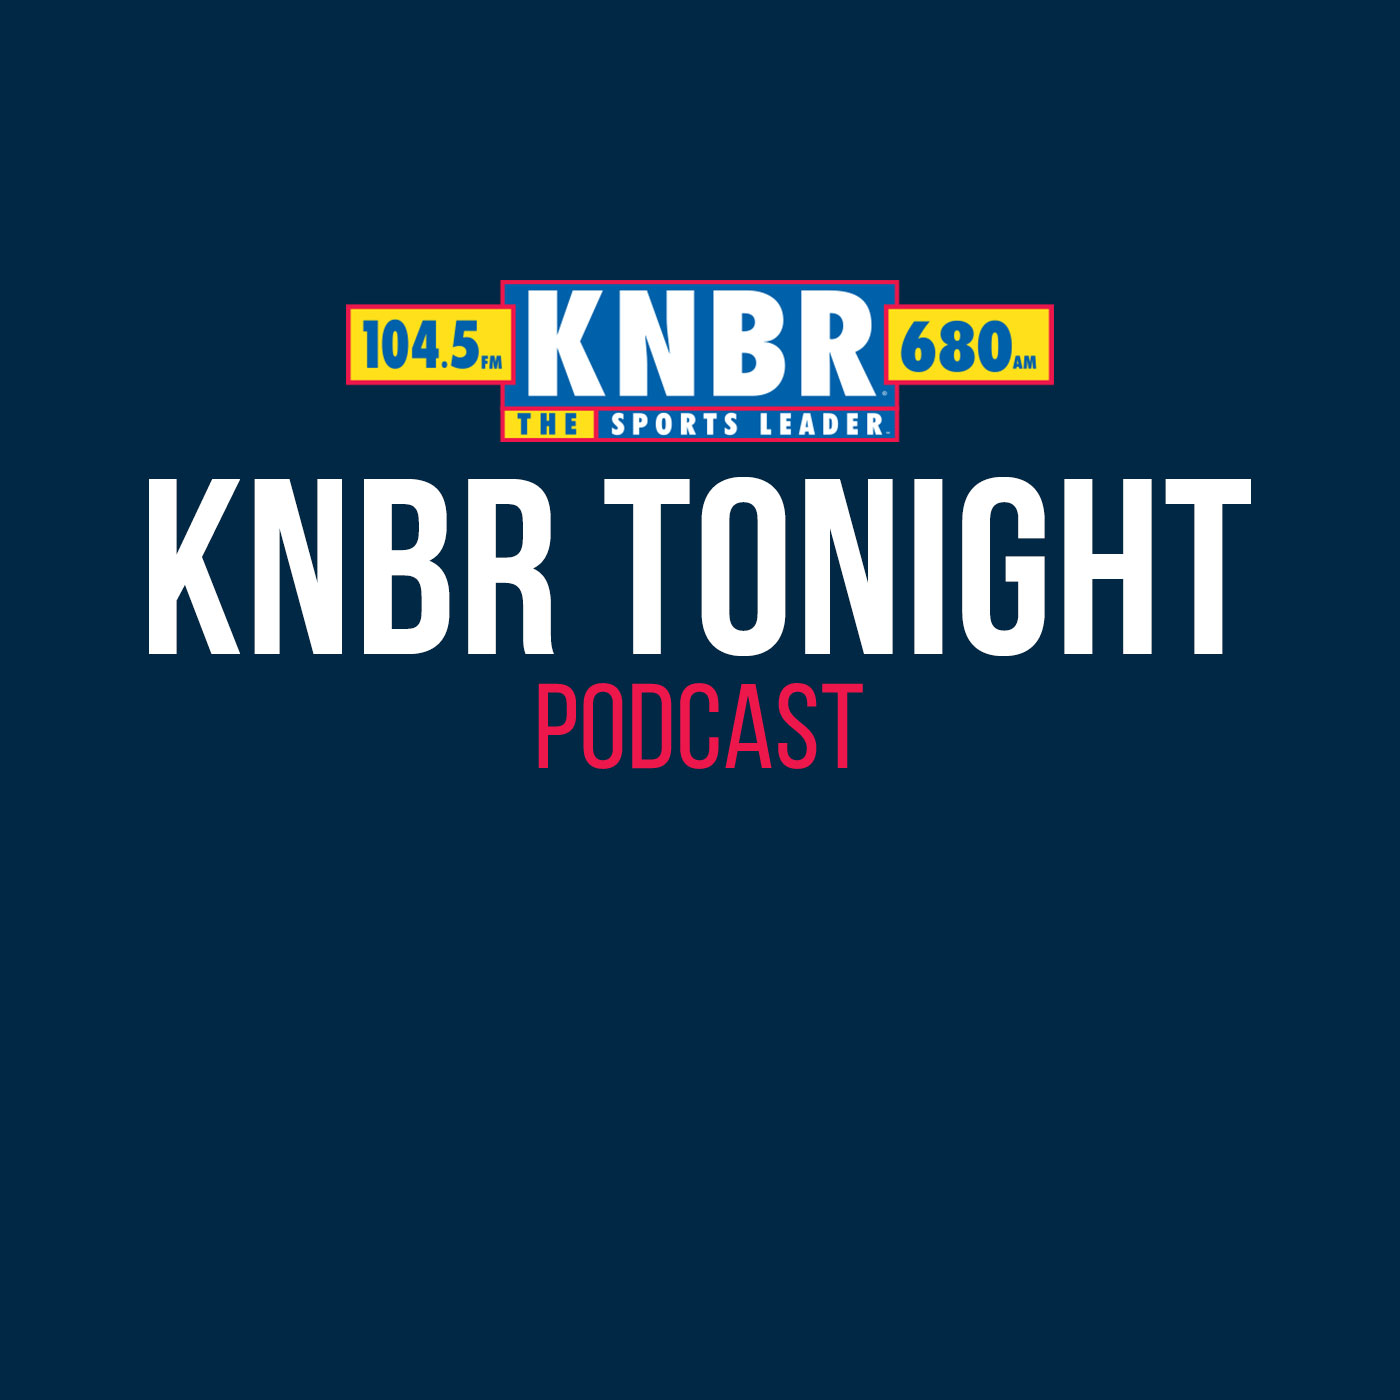 3-4 Mark Schofield joins KNBR Tonight with Dieter to break down the latest NFL Combine news